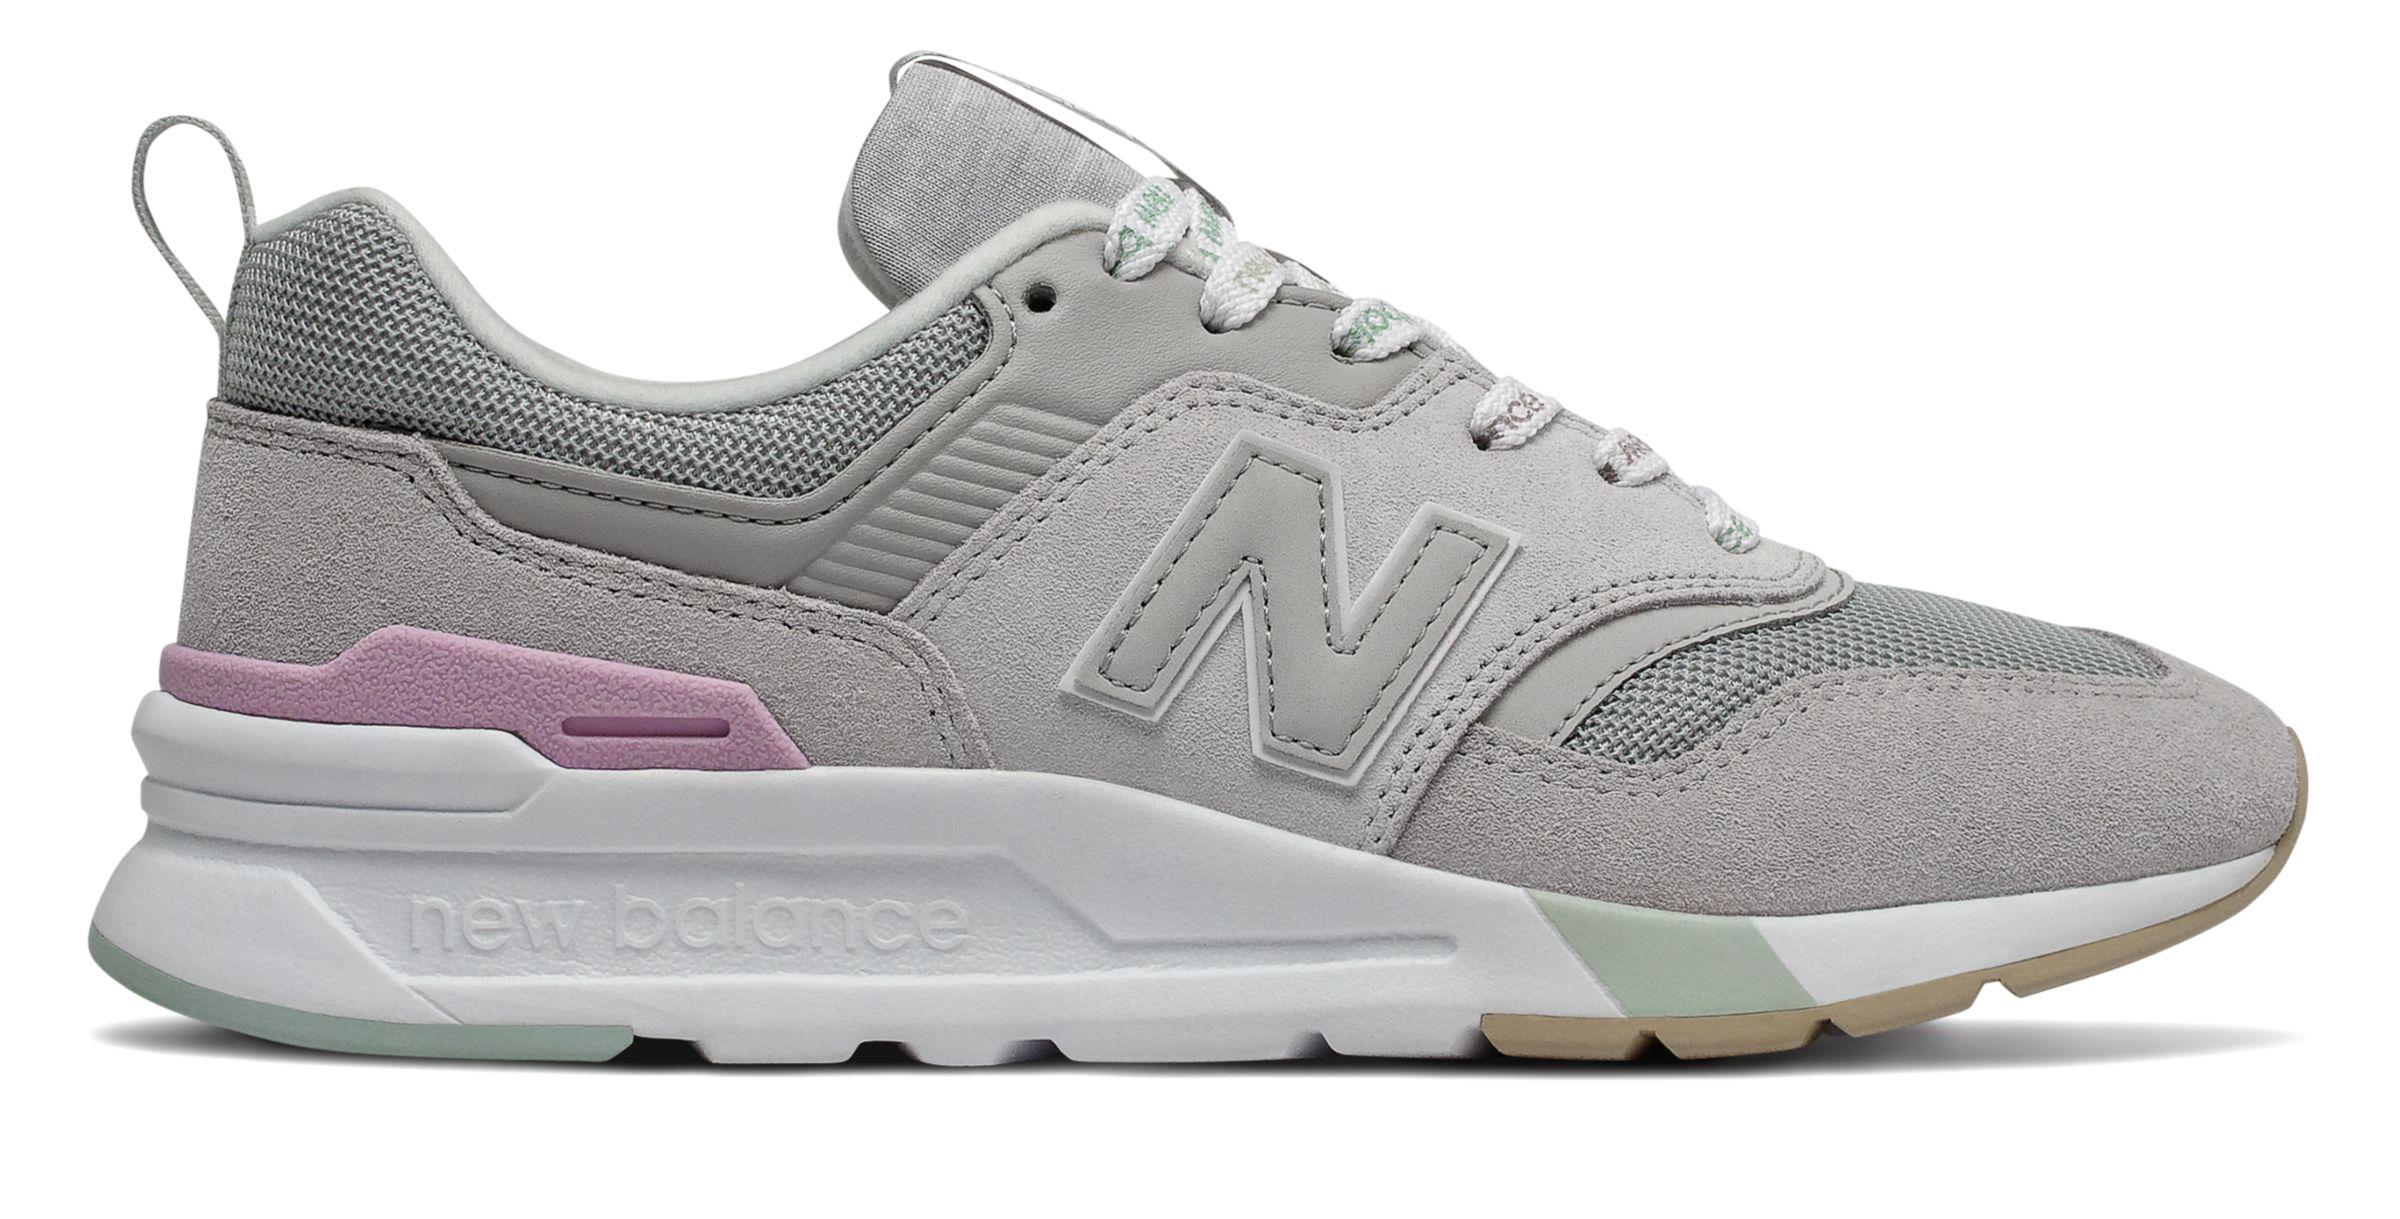 New Balance New Balance 997h Shoes in Grey - Lyst